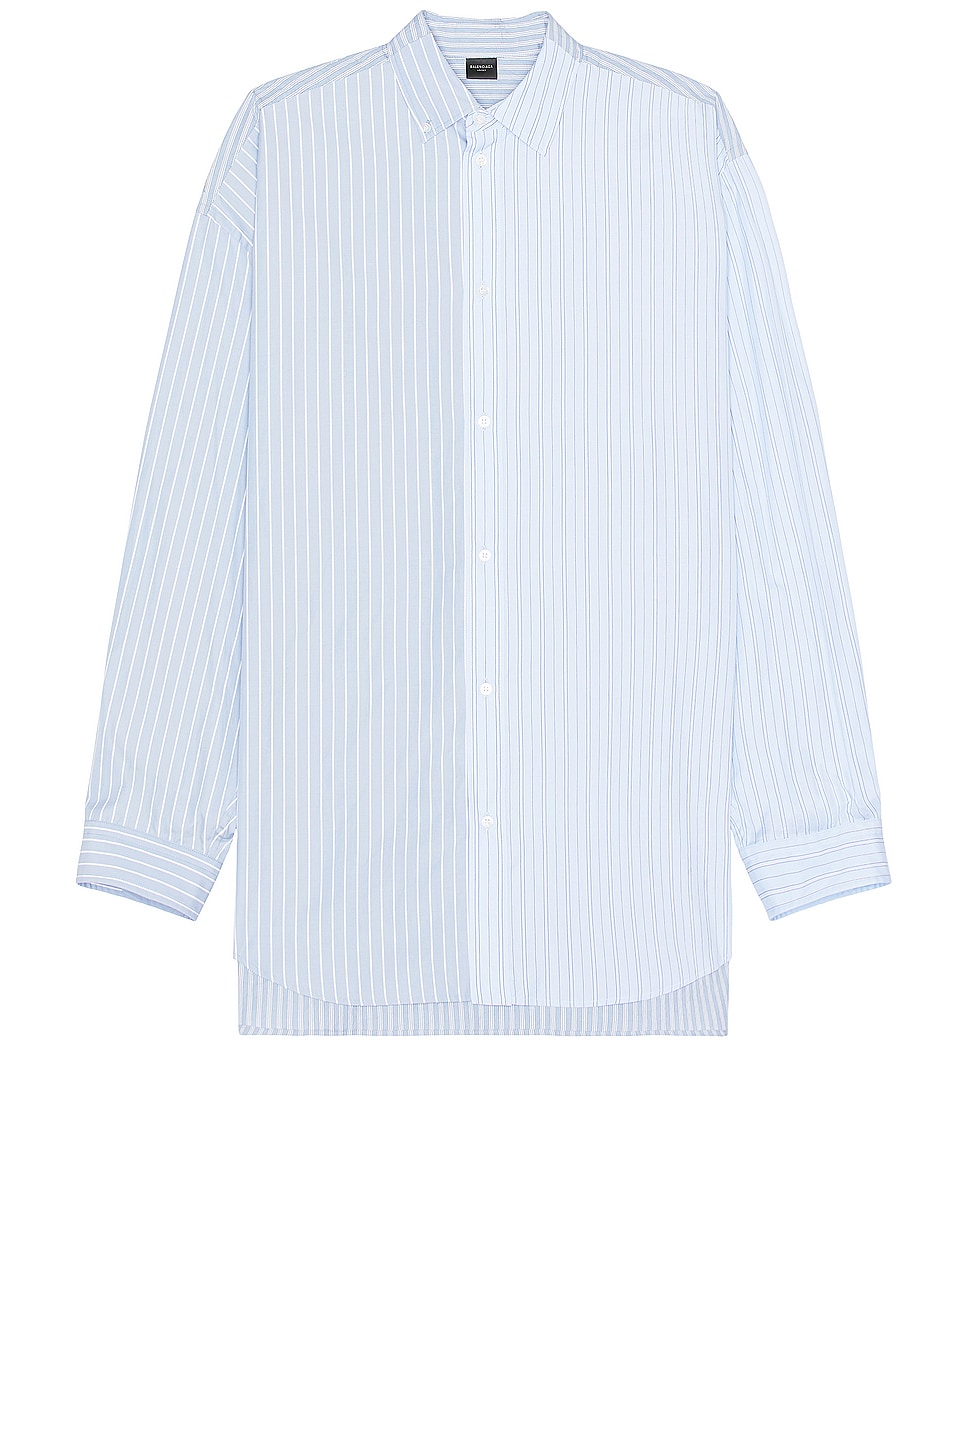 Image 1 of Balenciaga Patched Shirt in Sky Blue & White